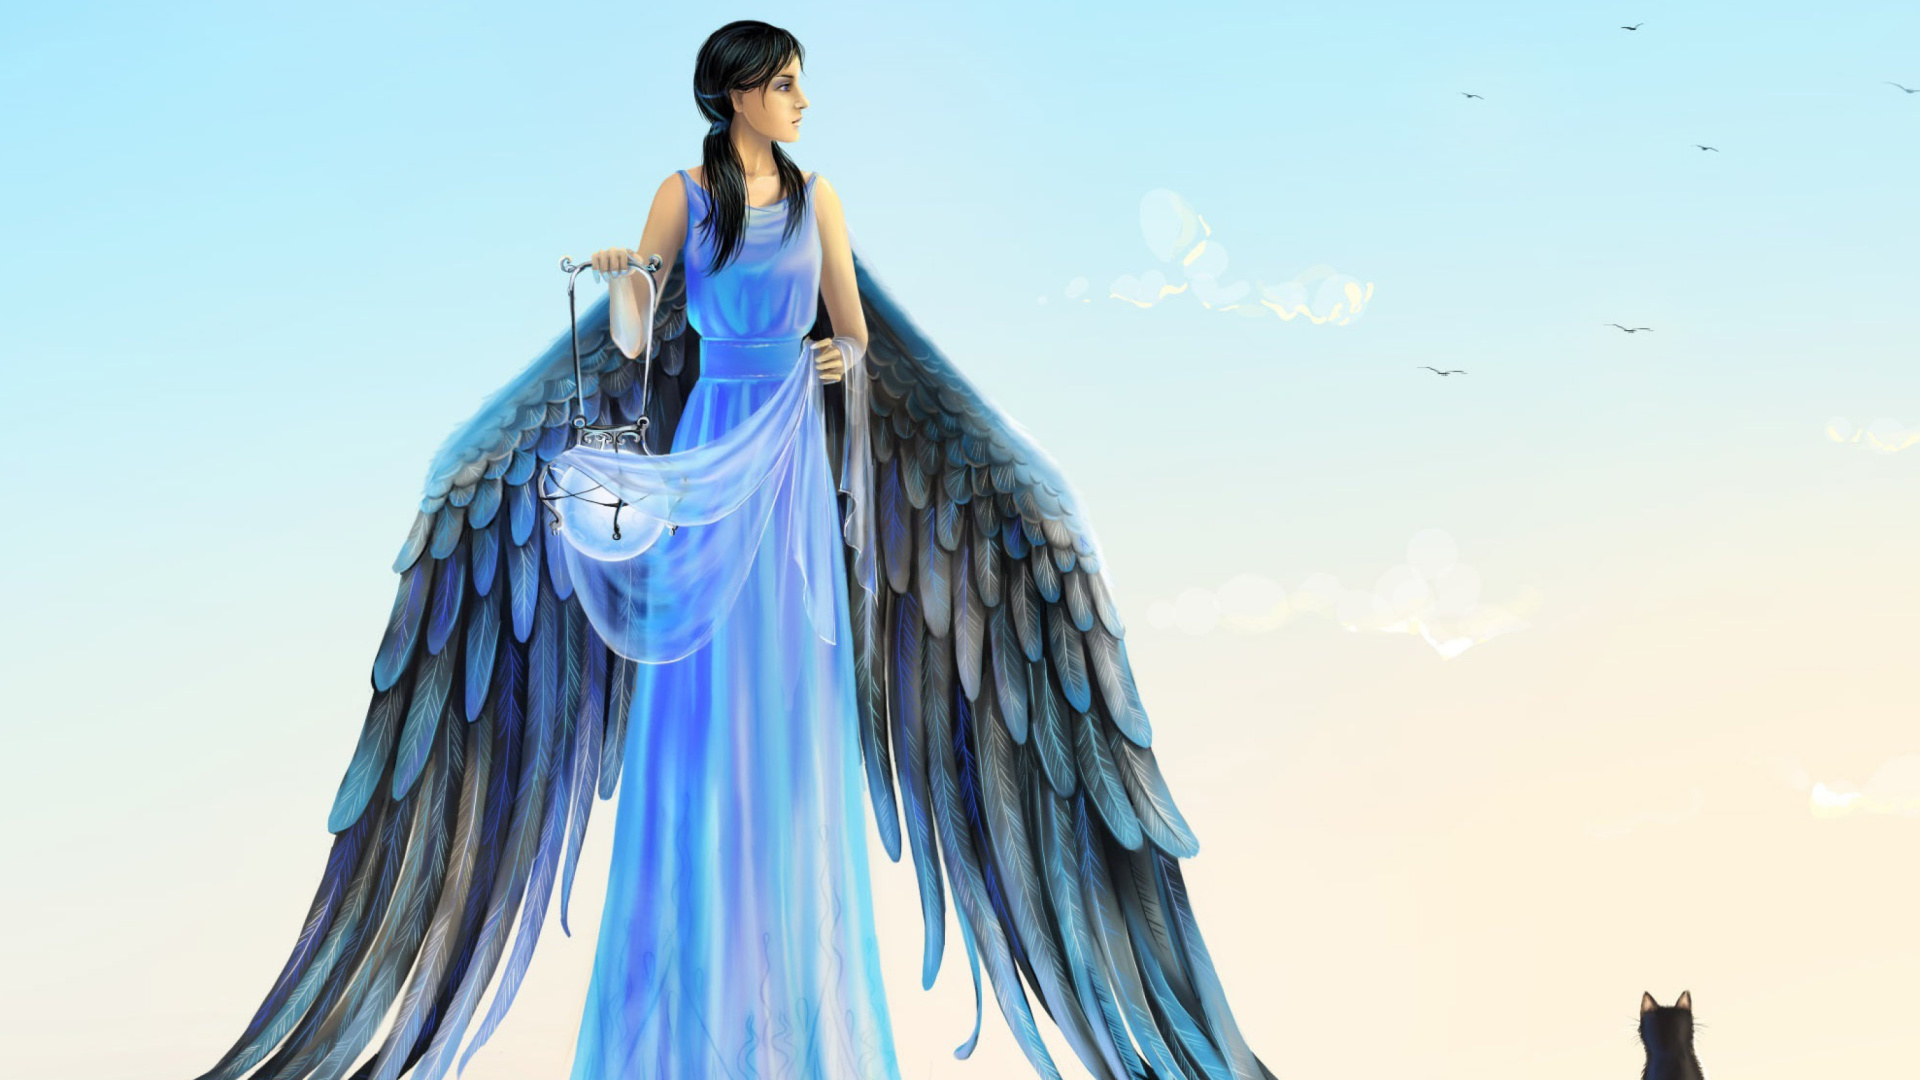 Das Angel with Wings Wallpaper 1920x1080